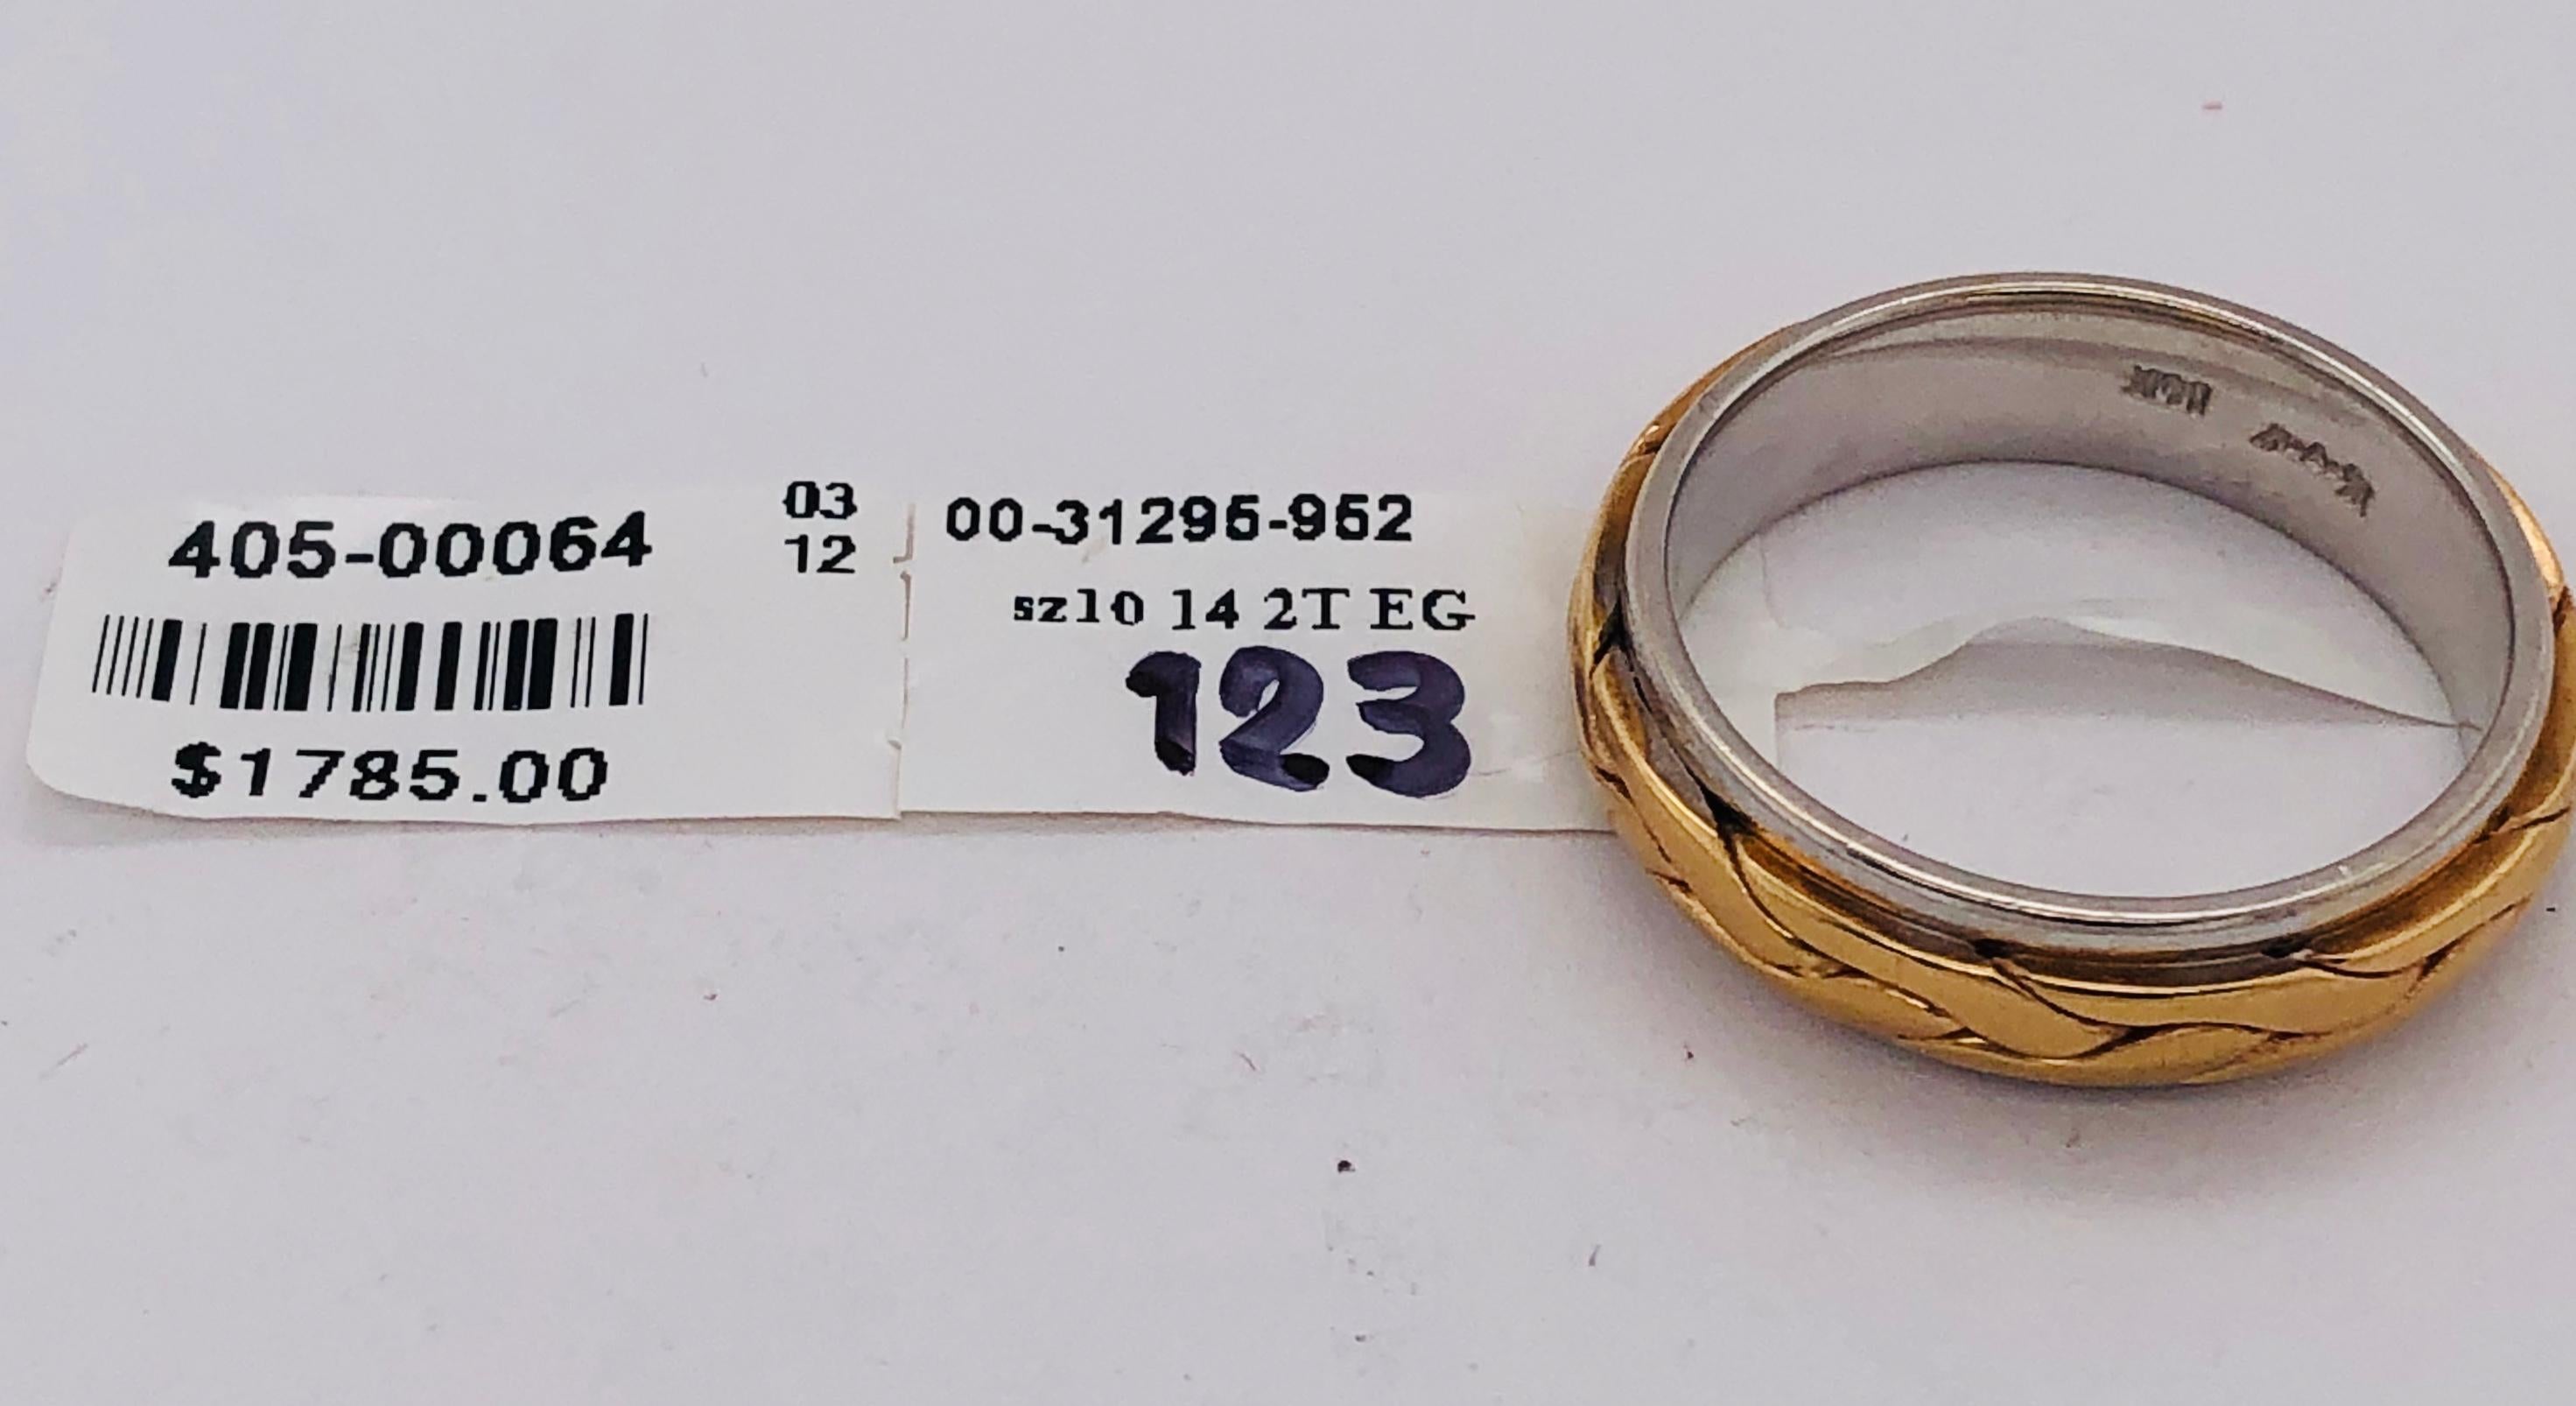 14 Karat Two-Tone Gold Braid Styled Band or Wedding Ring For Sale 2